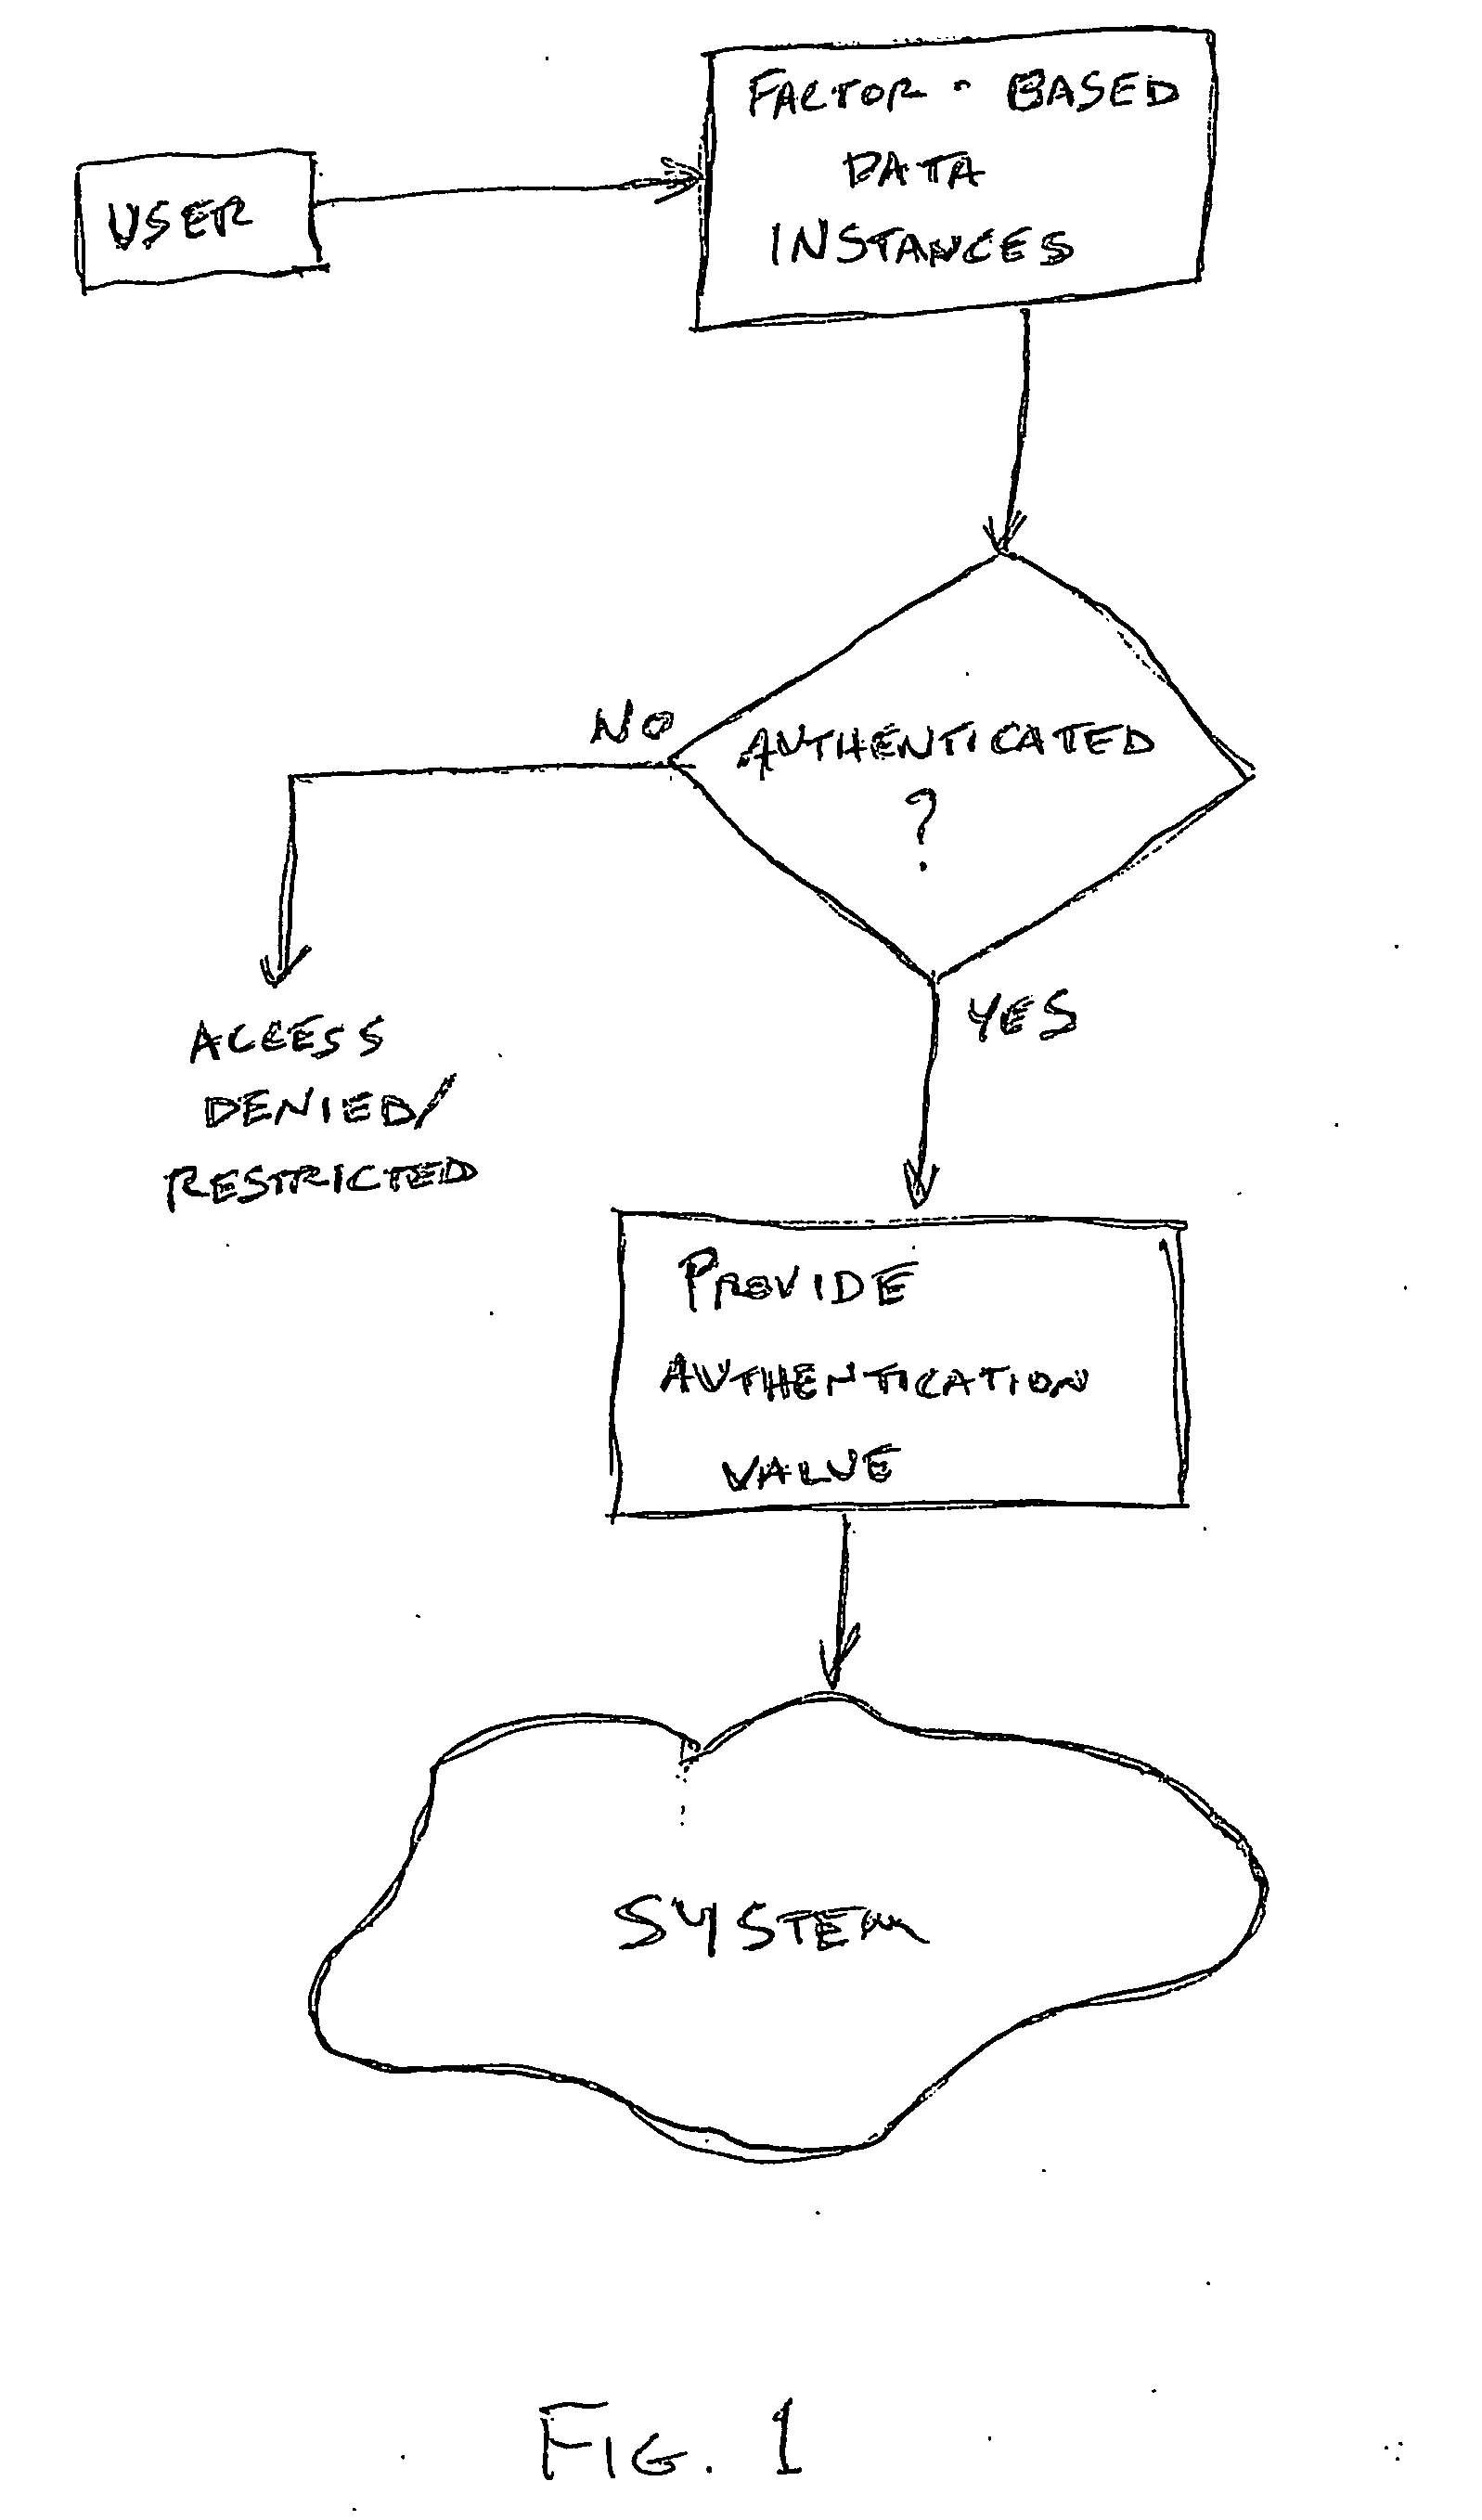 Access system utilizing multiple factor identification and authentication